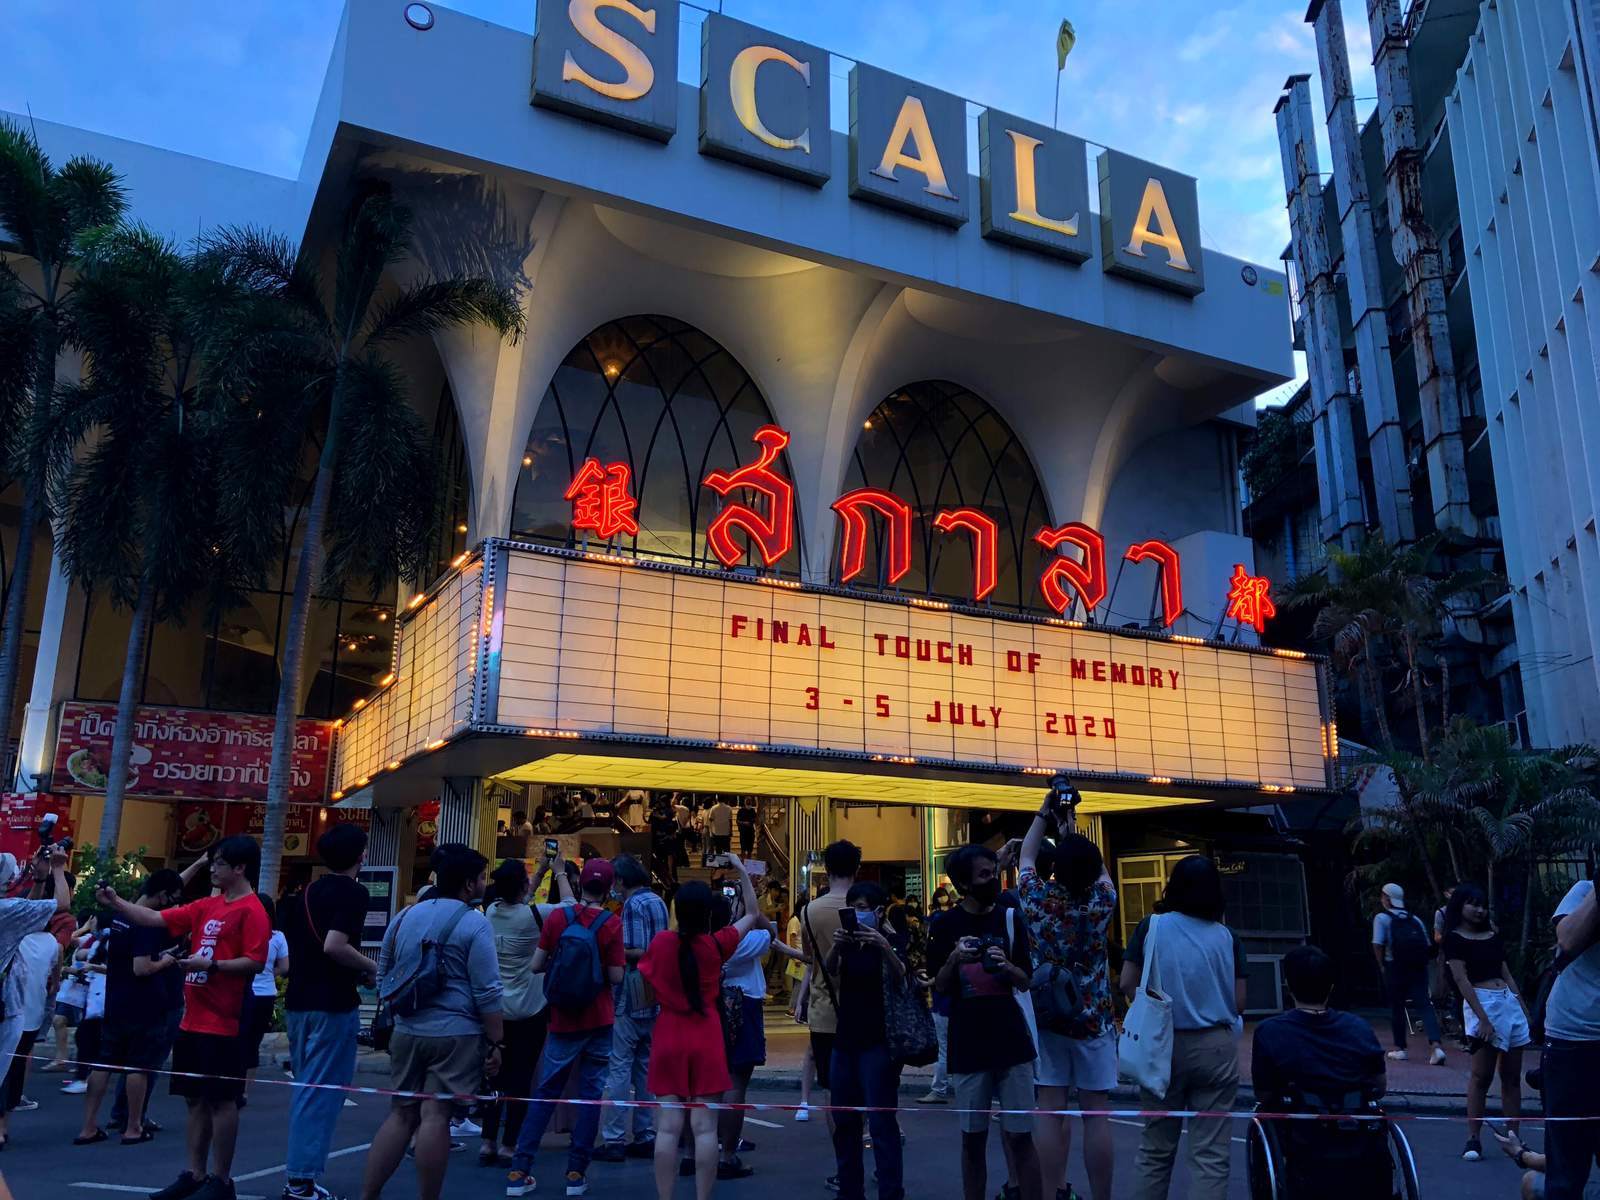 Thais bid addio to theater where they fell in love with film